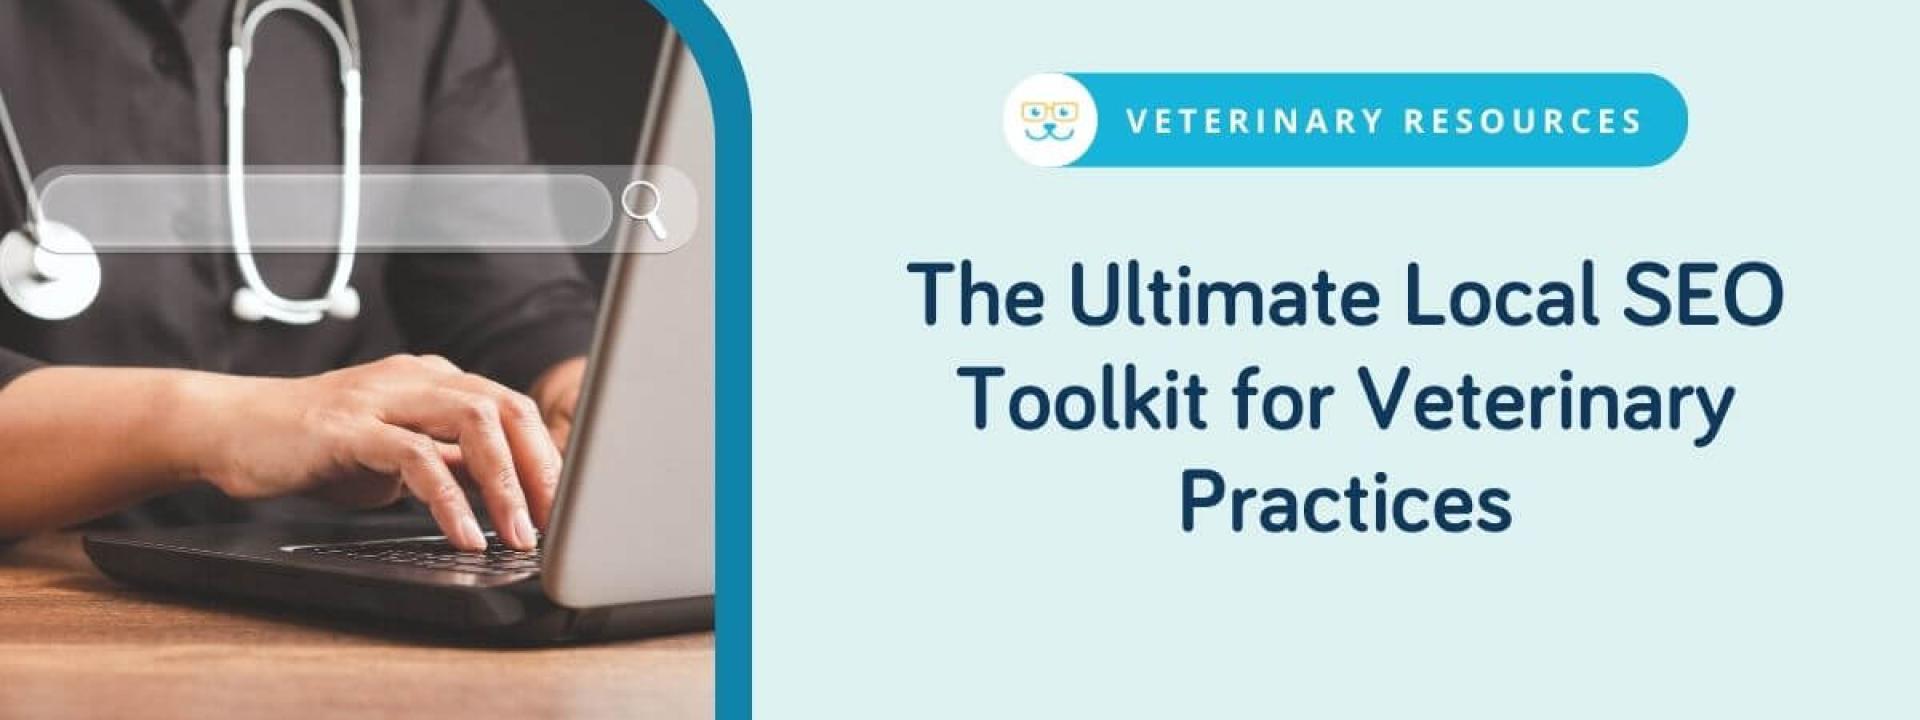 The Ultimate Local SEO Toolkit for Veterinary Practices